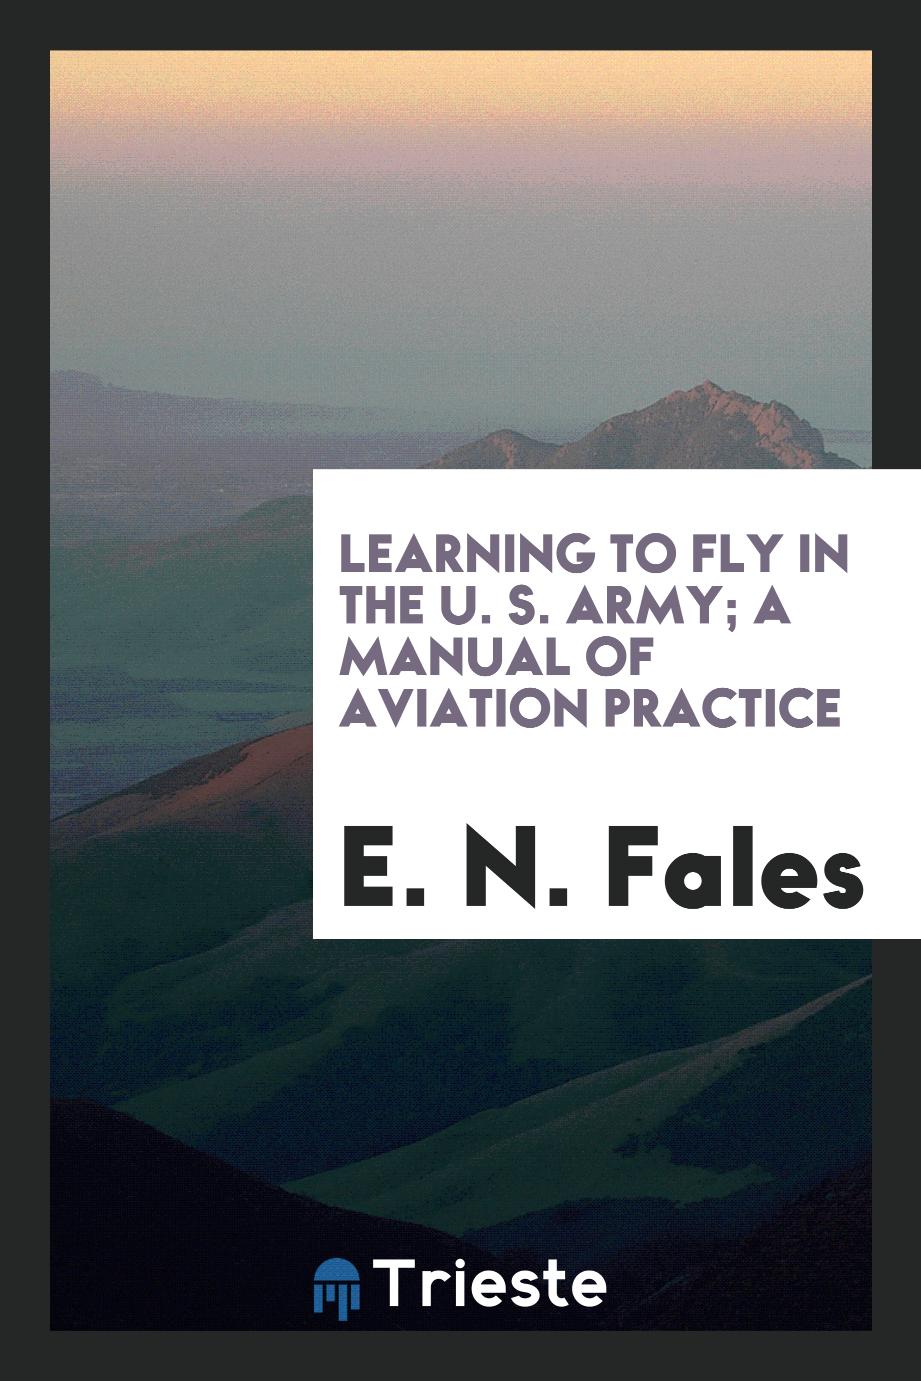 Learning to fly in the U. S. Army; a manual of aviation practice